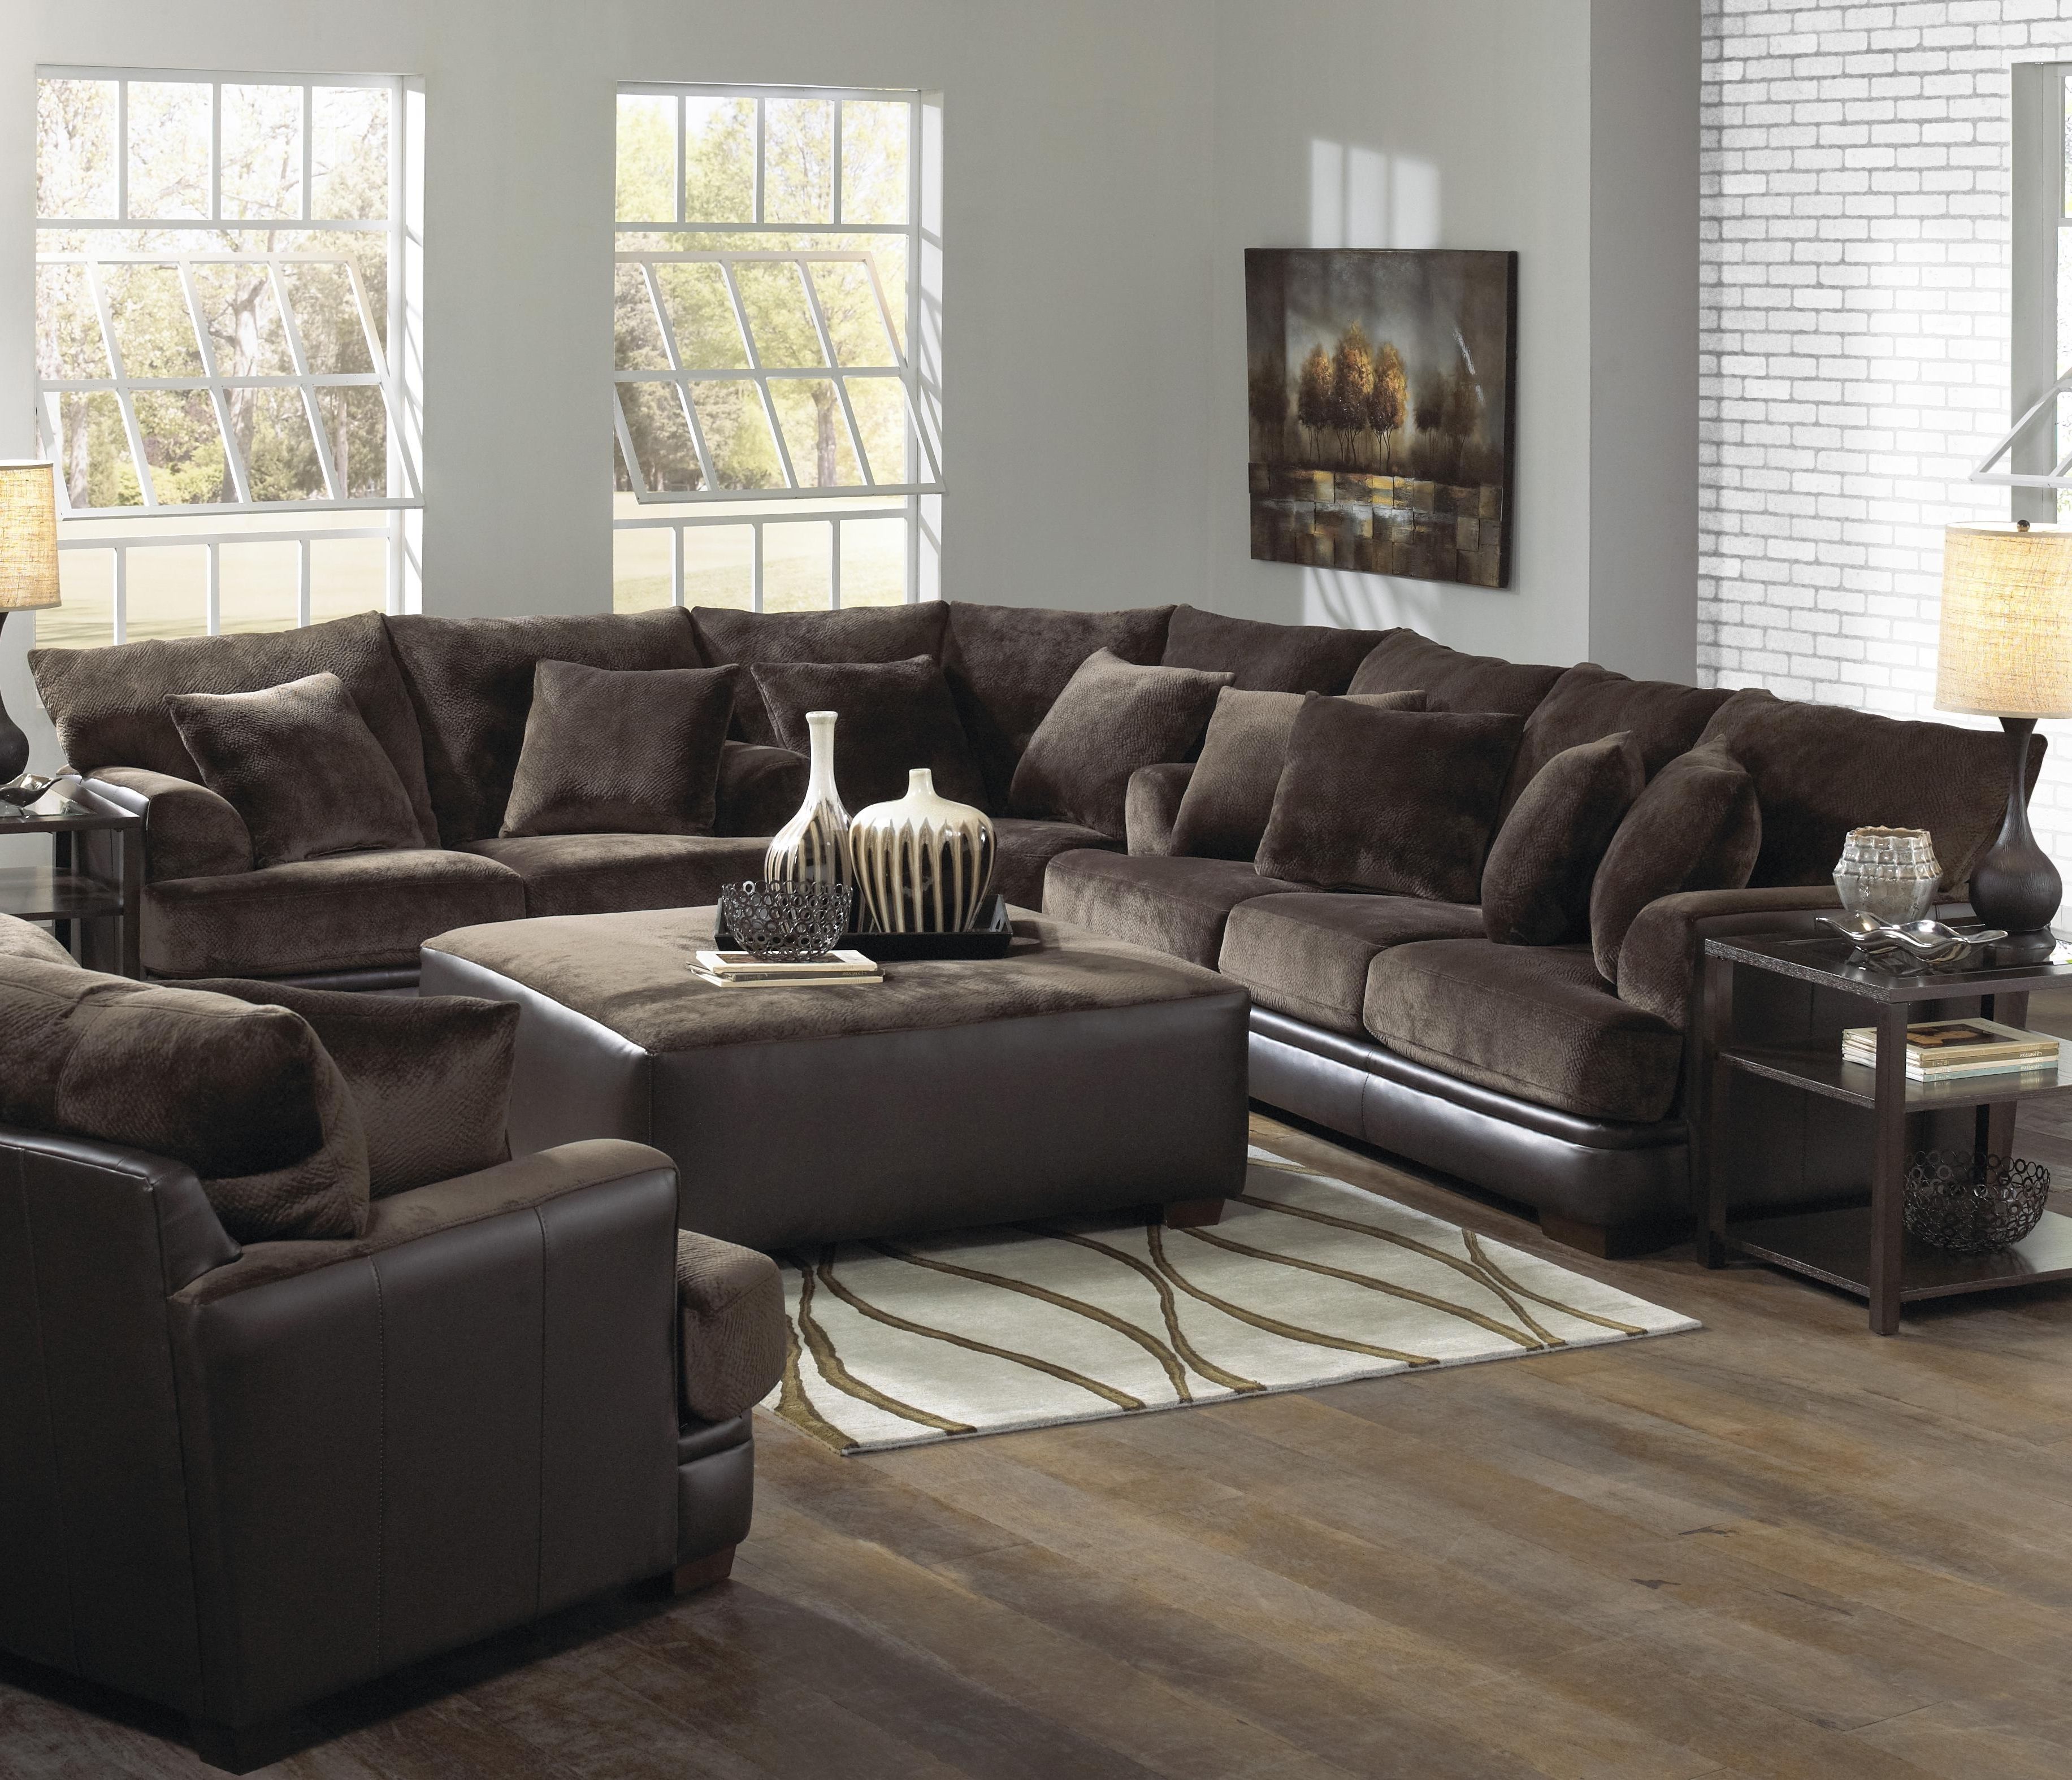 Large Comfortable Sectional Sofas Throughout Preferred Extra Large Couches Comfortable Sofa Oversized Deep Couch Extra (View 18 of 20)